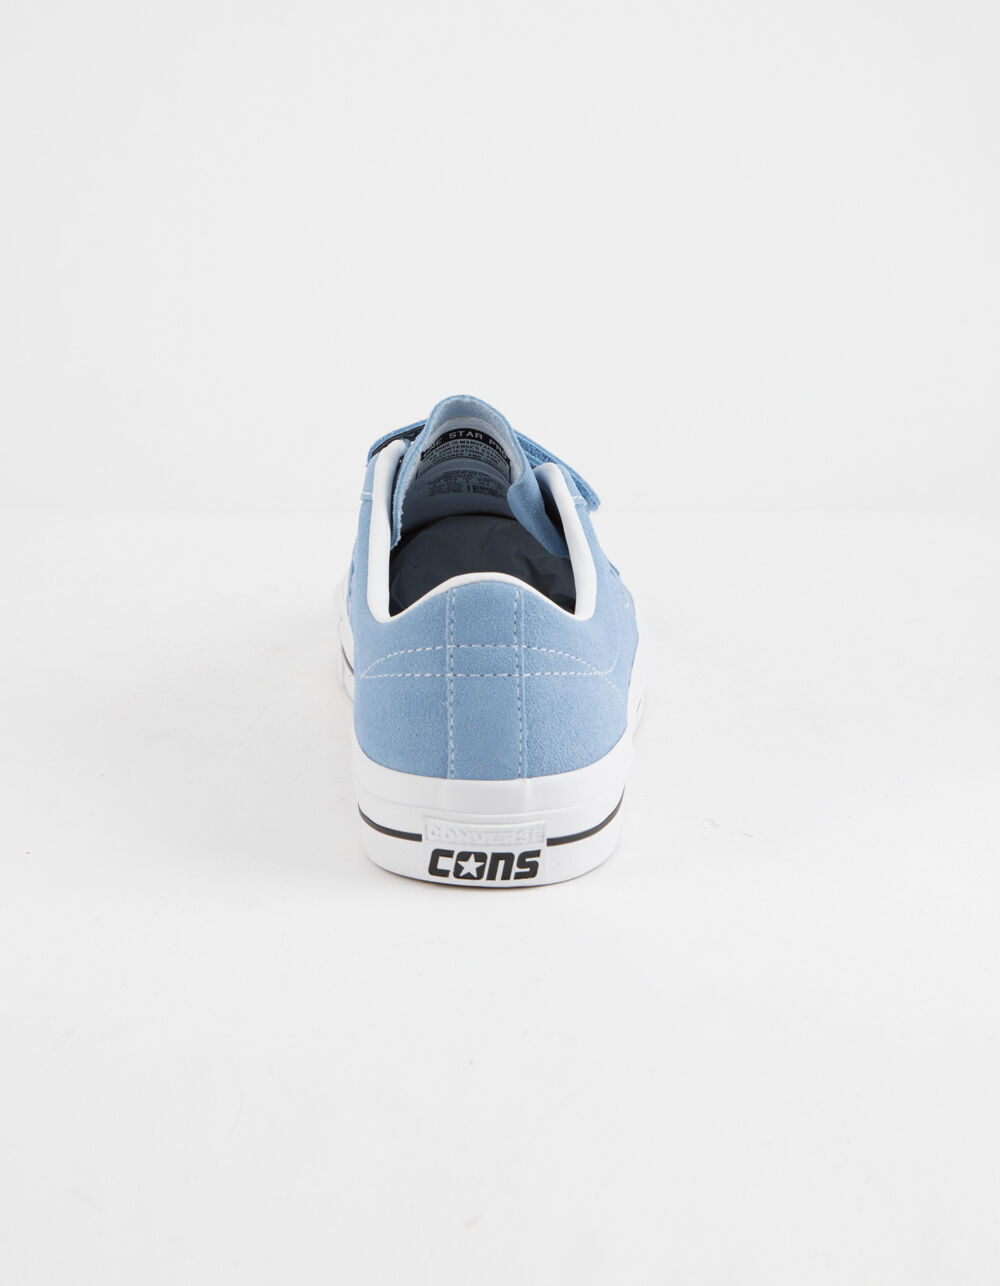 CONVERSE One Star Pro 3v Ox Light Blue & White Velcro Shoes image number 4